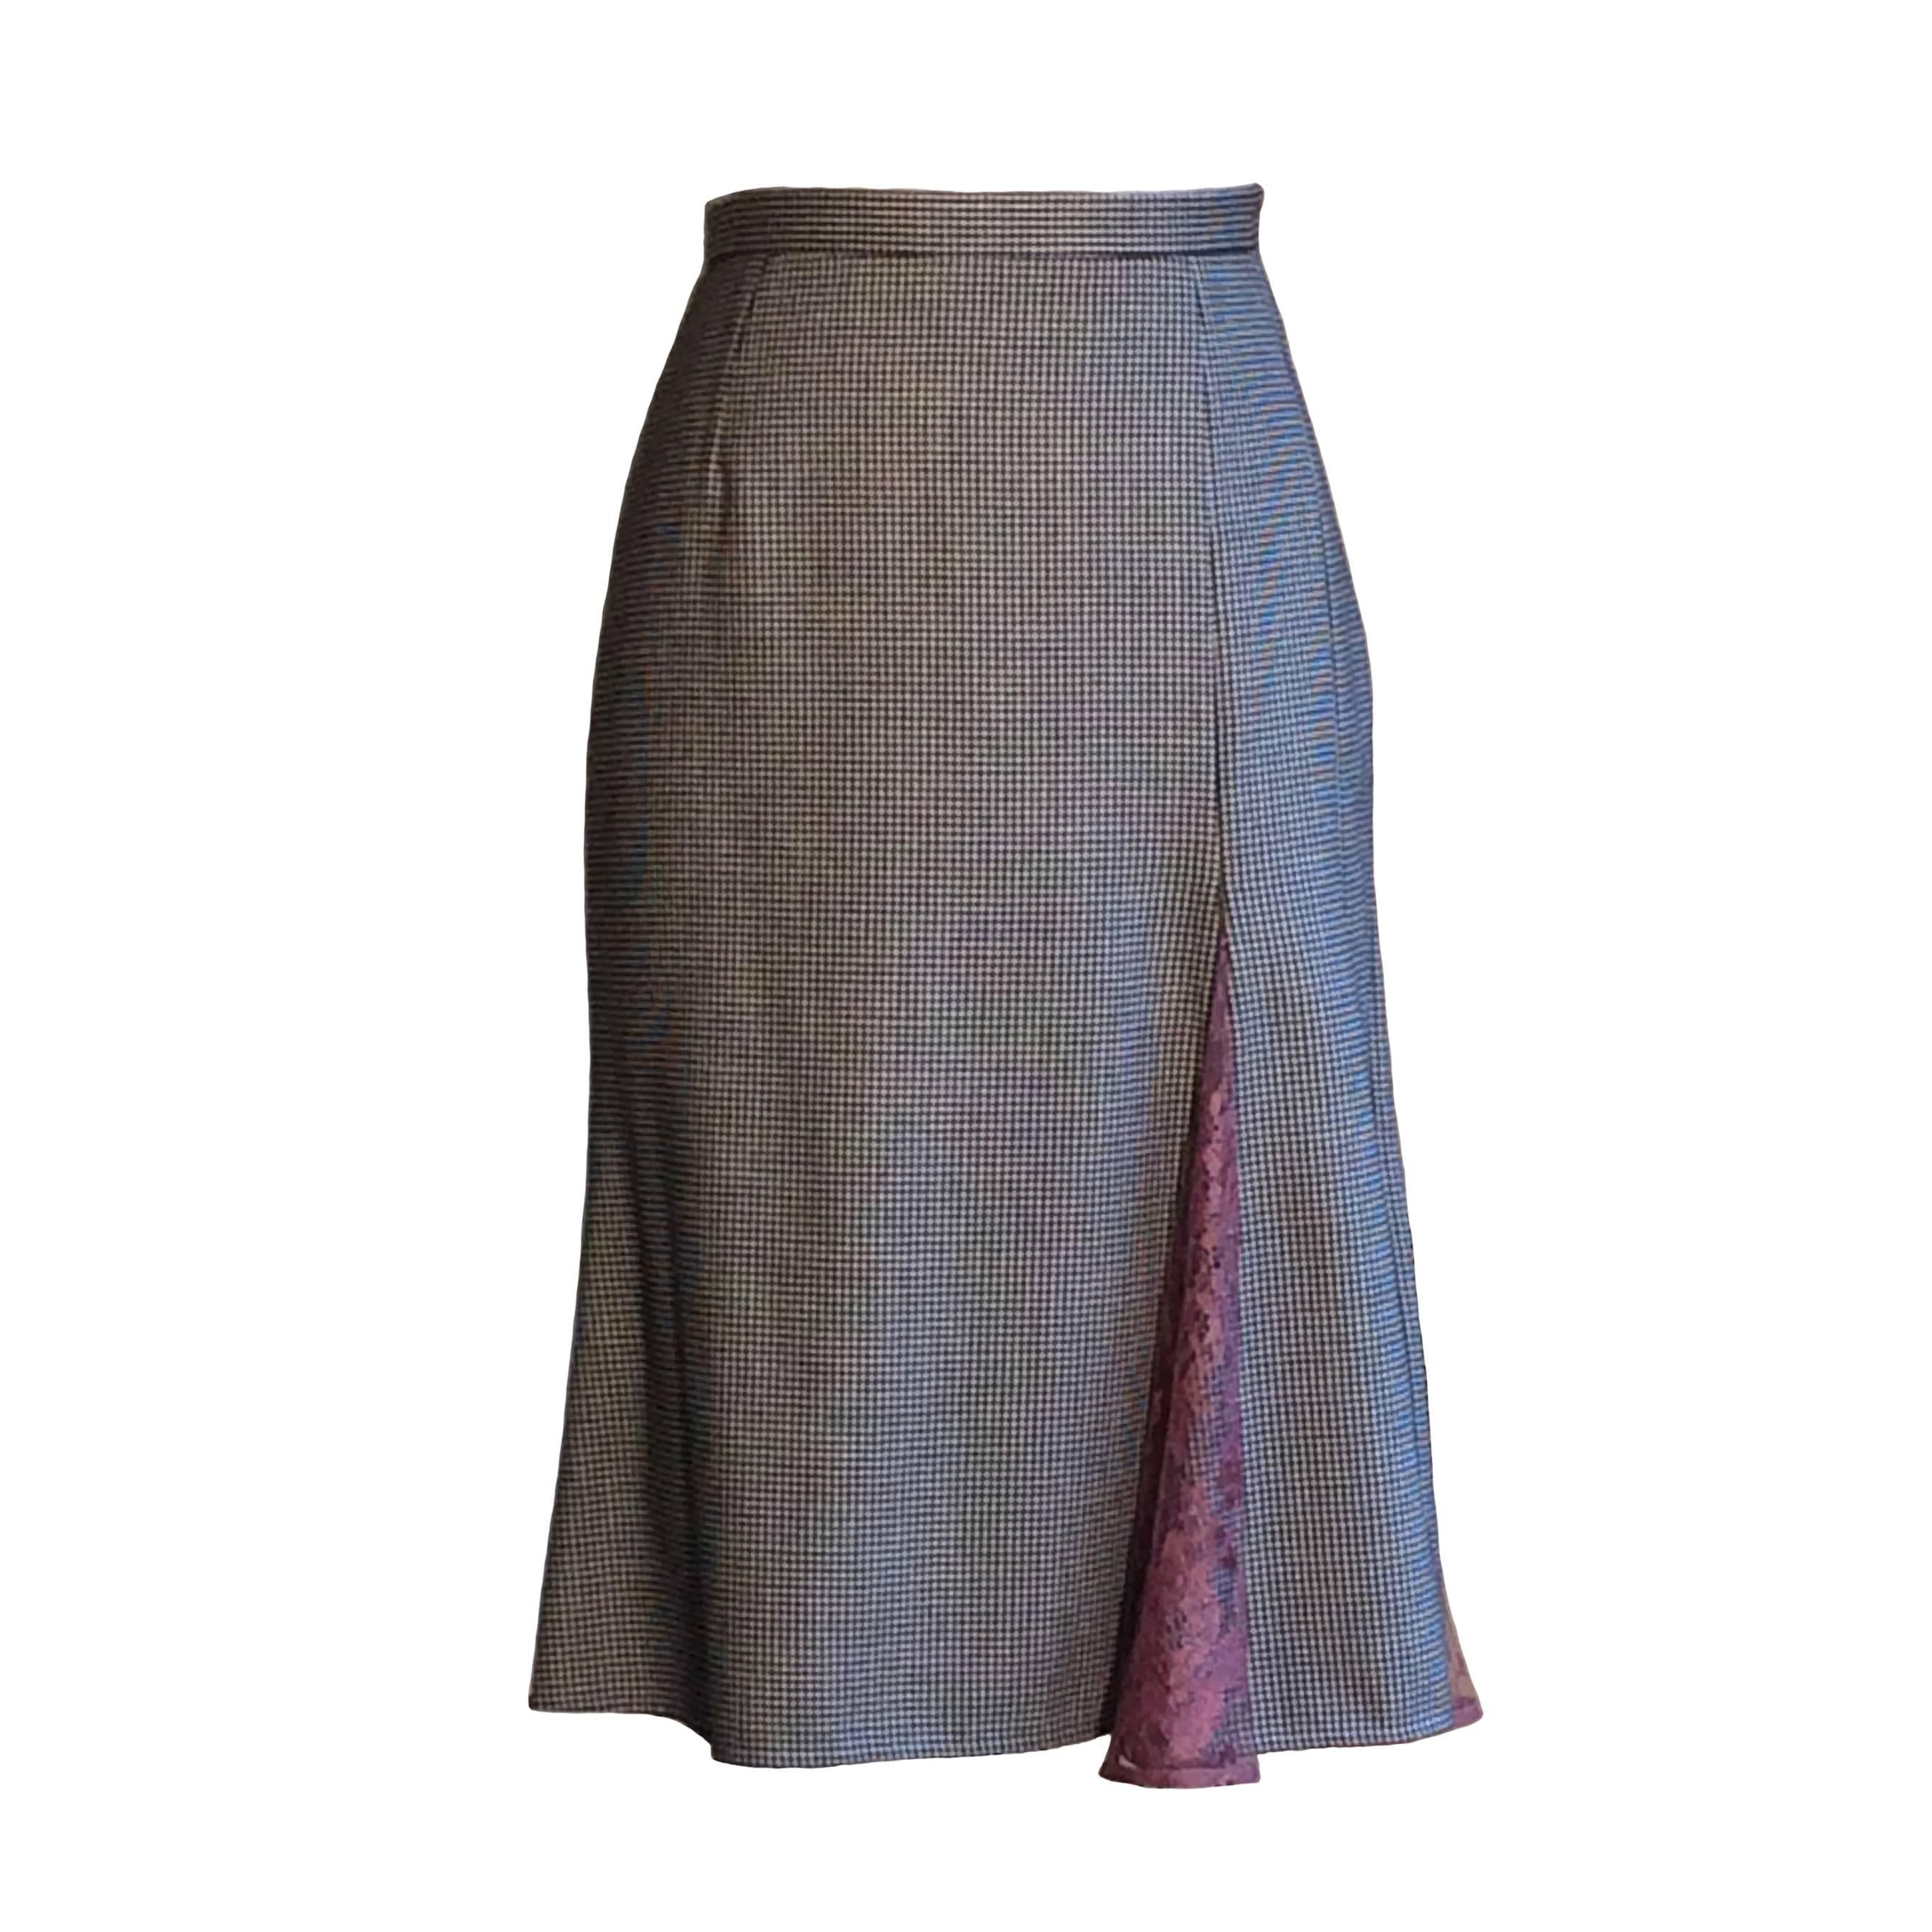 Dolce & Gabbana Black and White Houndstooth Pencil Skirt with Mauve Lace Accents